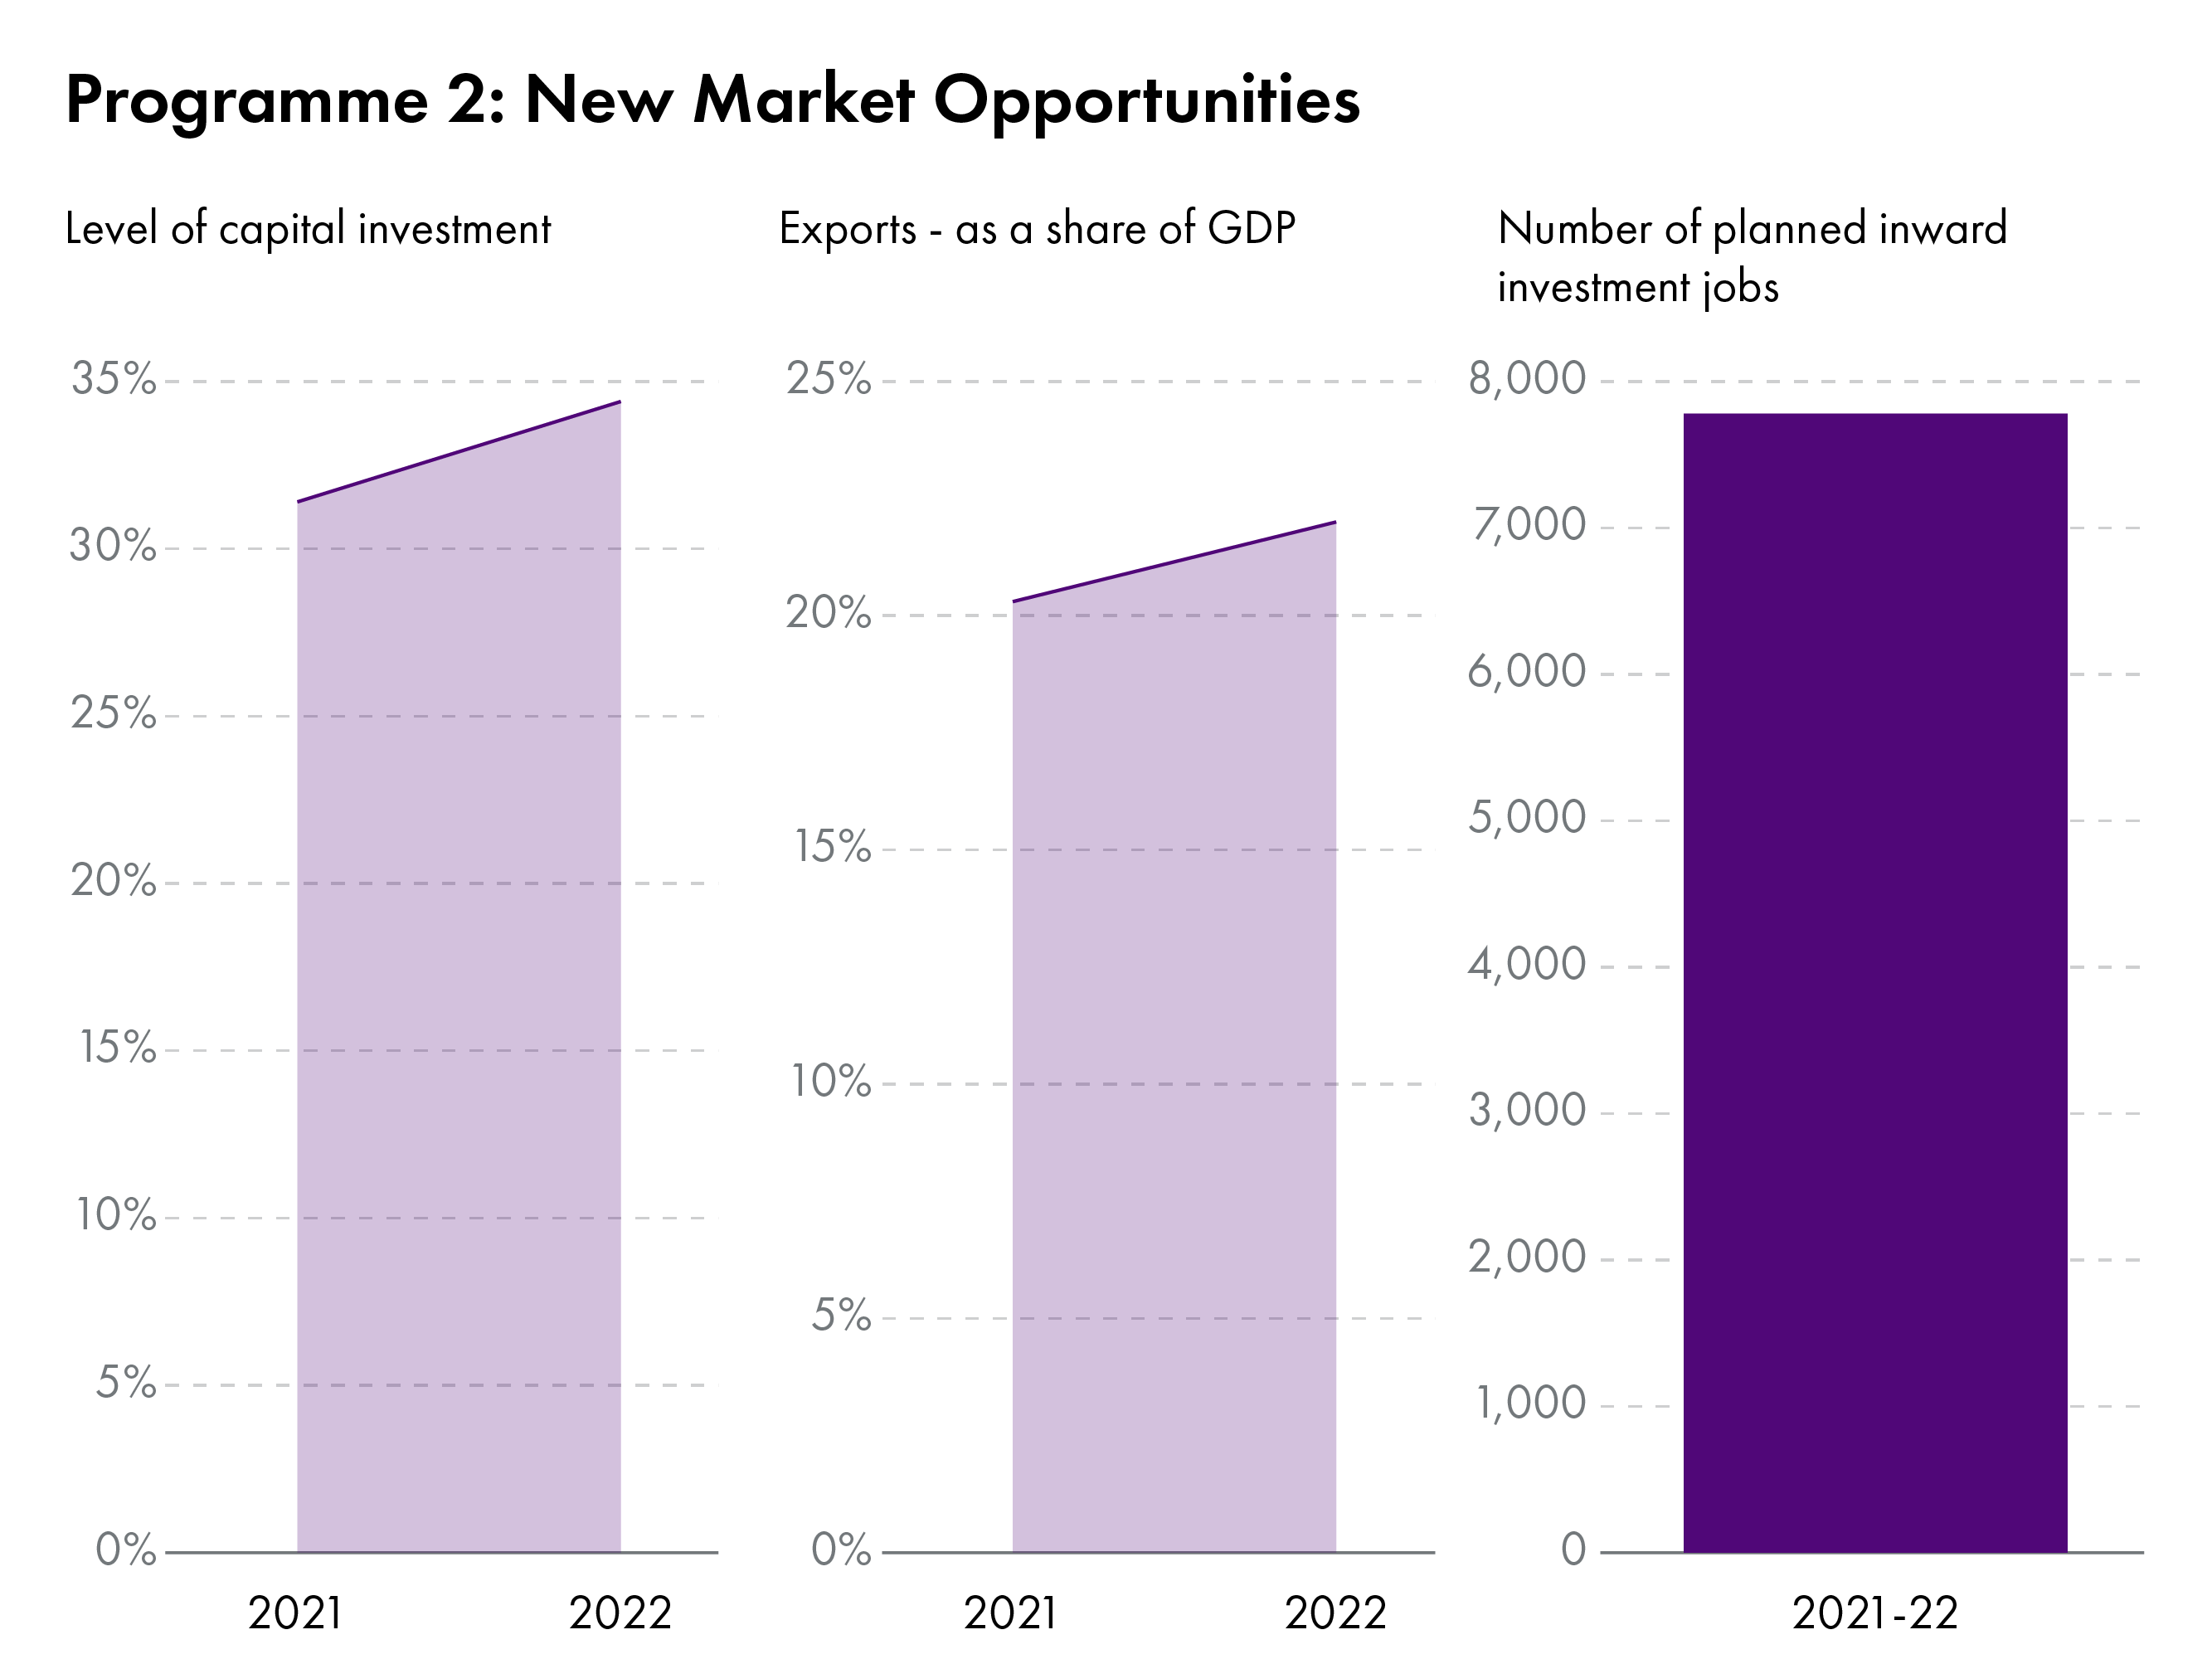 The key indicators for the ‘New Market Opportunities’ programme are levels of capital investment, exports as a share of GDP, and number of planned inward investment jobs. Between 2021 and 2022 levels of capital investment and exports as a share of GDP grew encouragingly.